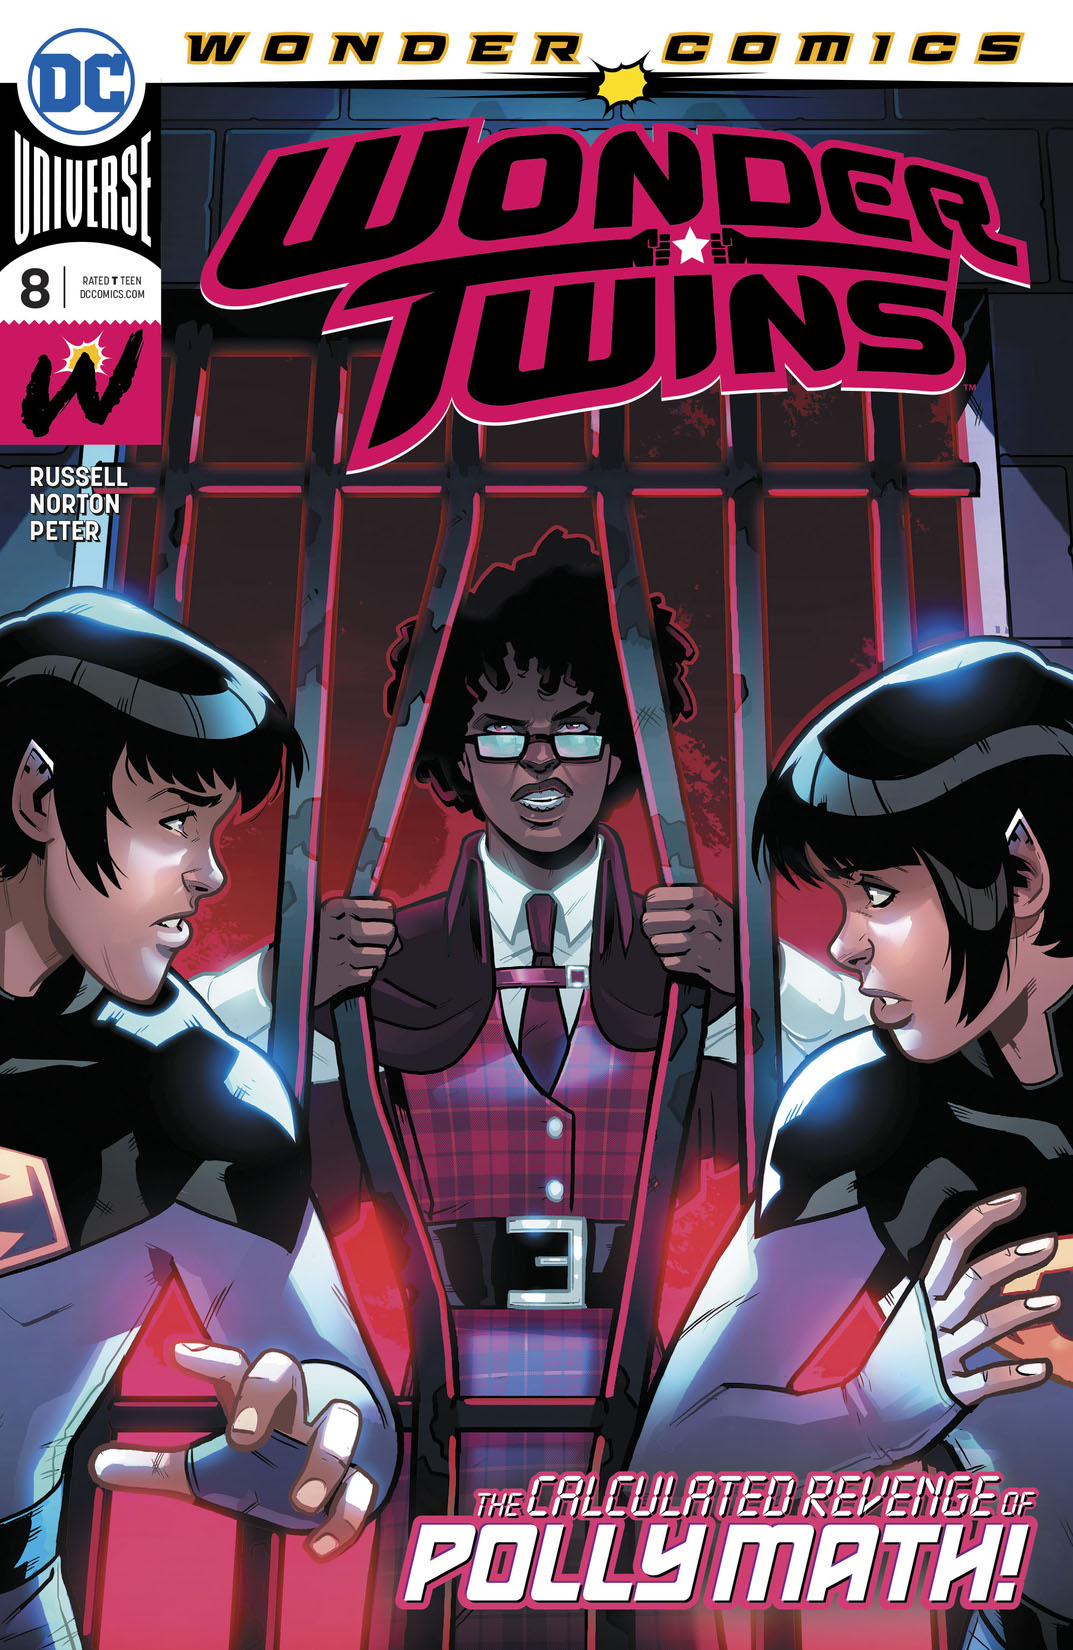 Wonder Twins #8 preview images